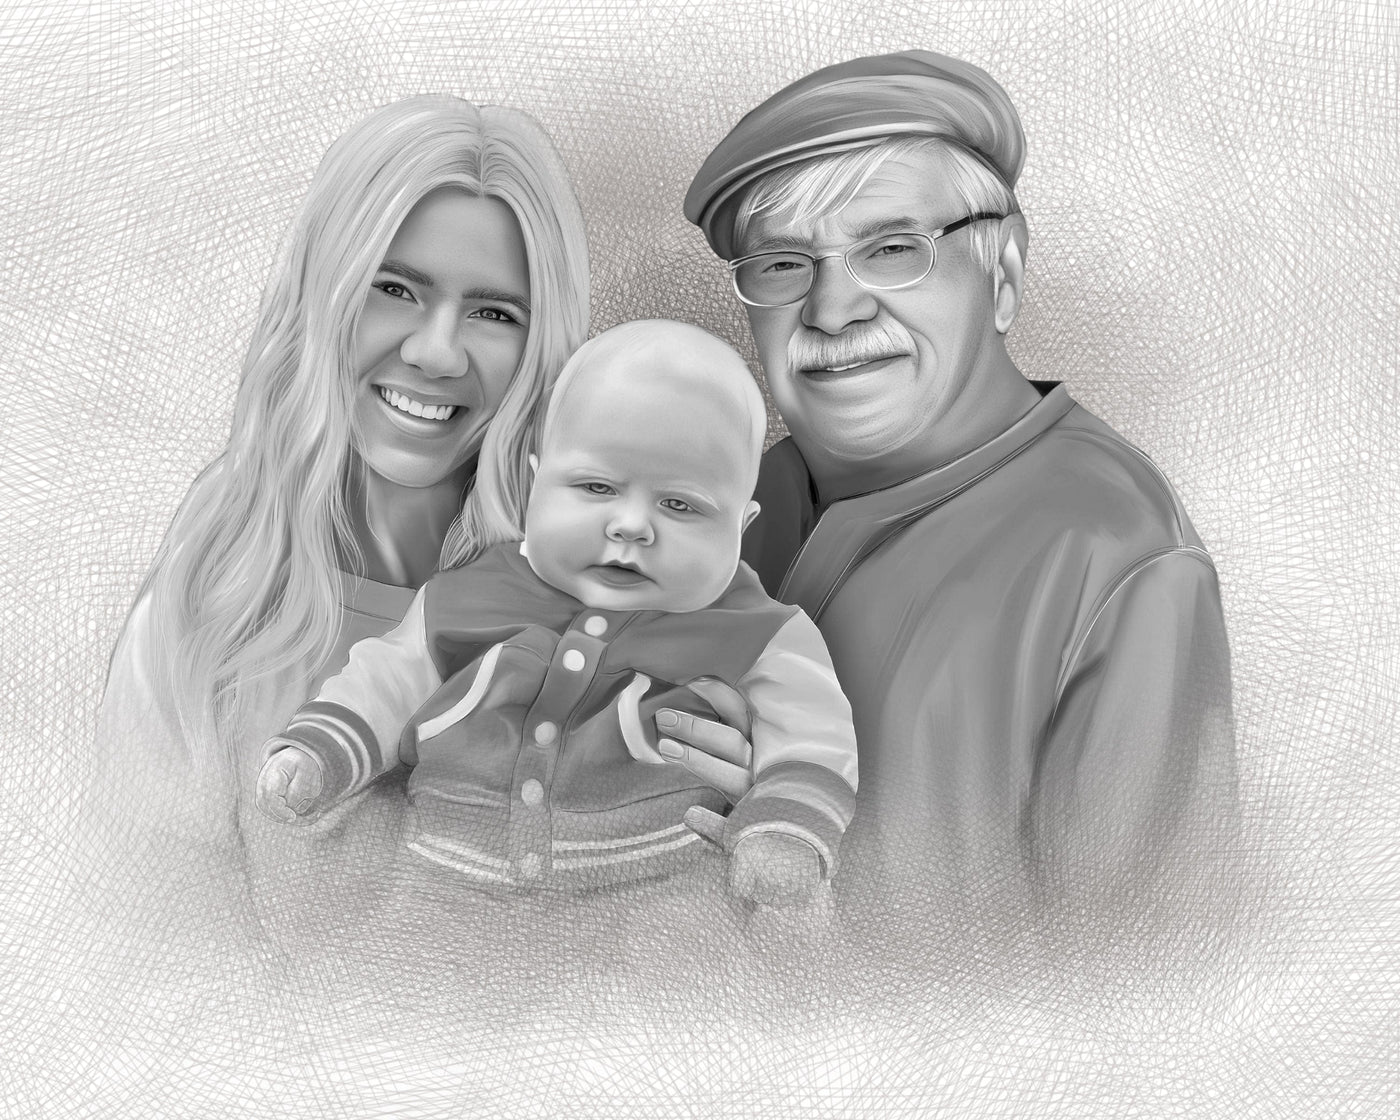 Custom Baby Charcoal Drawing of a mother with her baby, also including her father, drawn in black and white